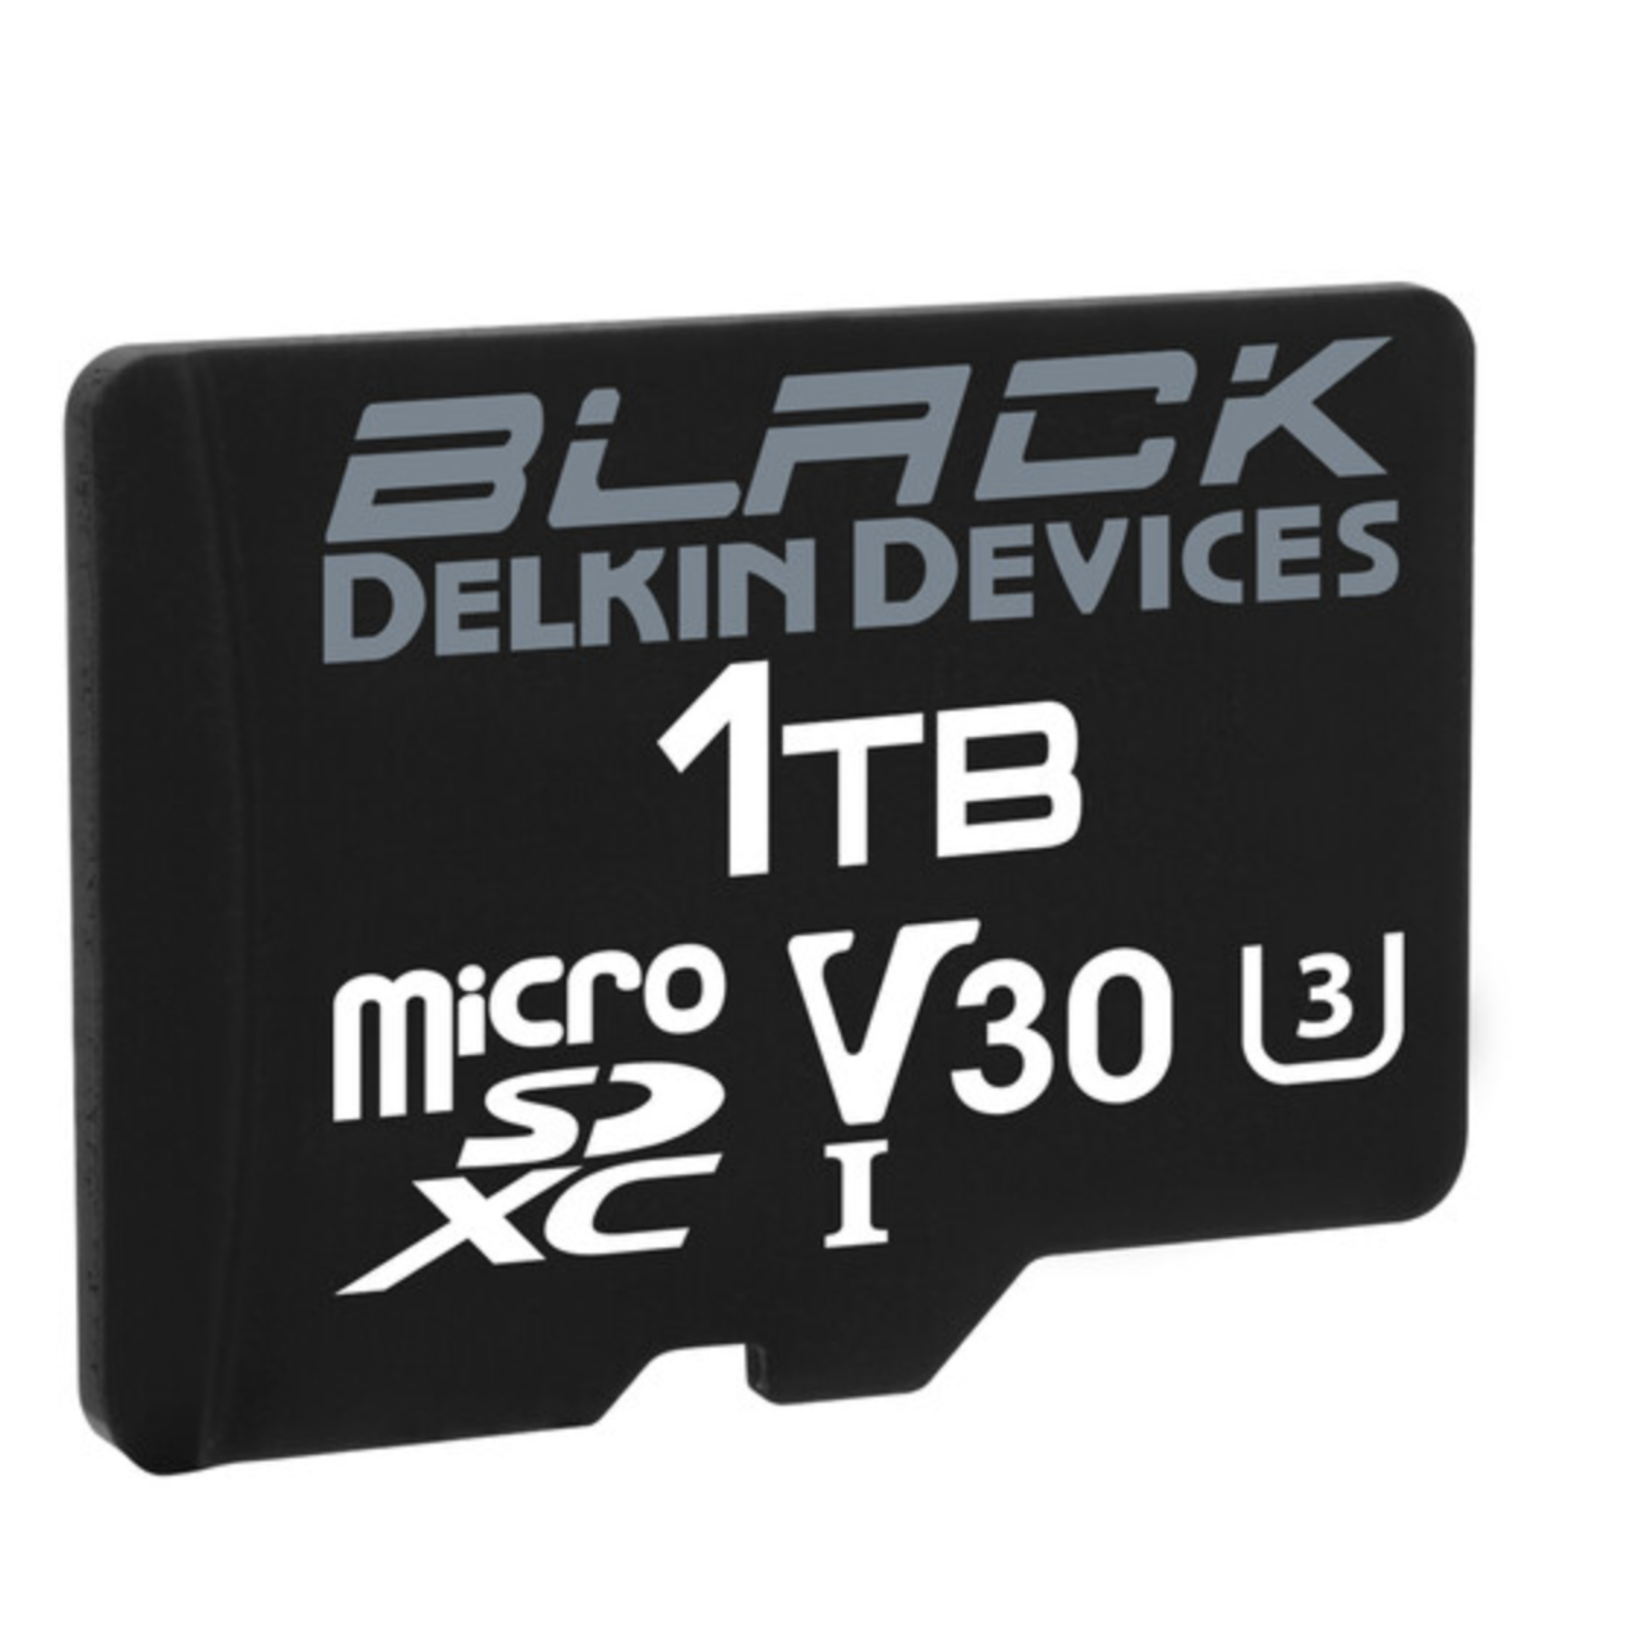 Delkin Delkin Devices 1TB BLACK UHS-I microSDXC Memory Card with SD Adapter